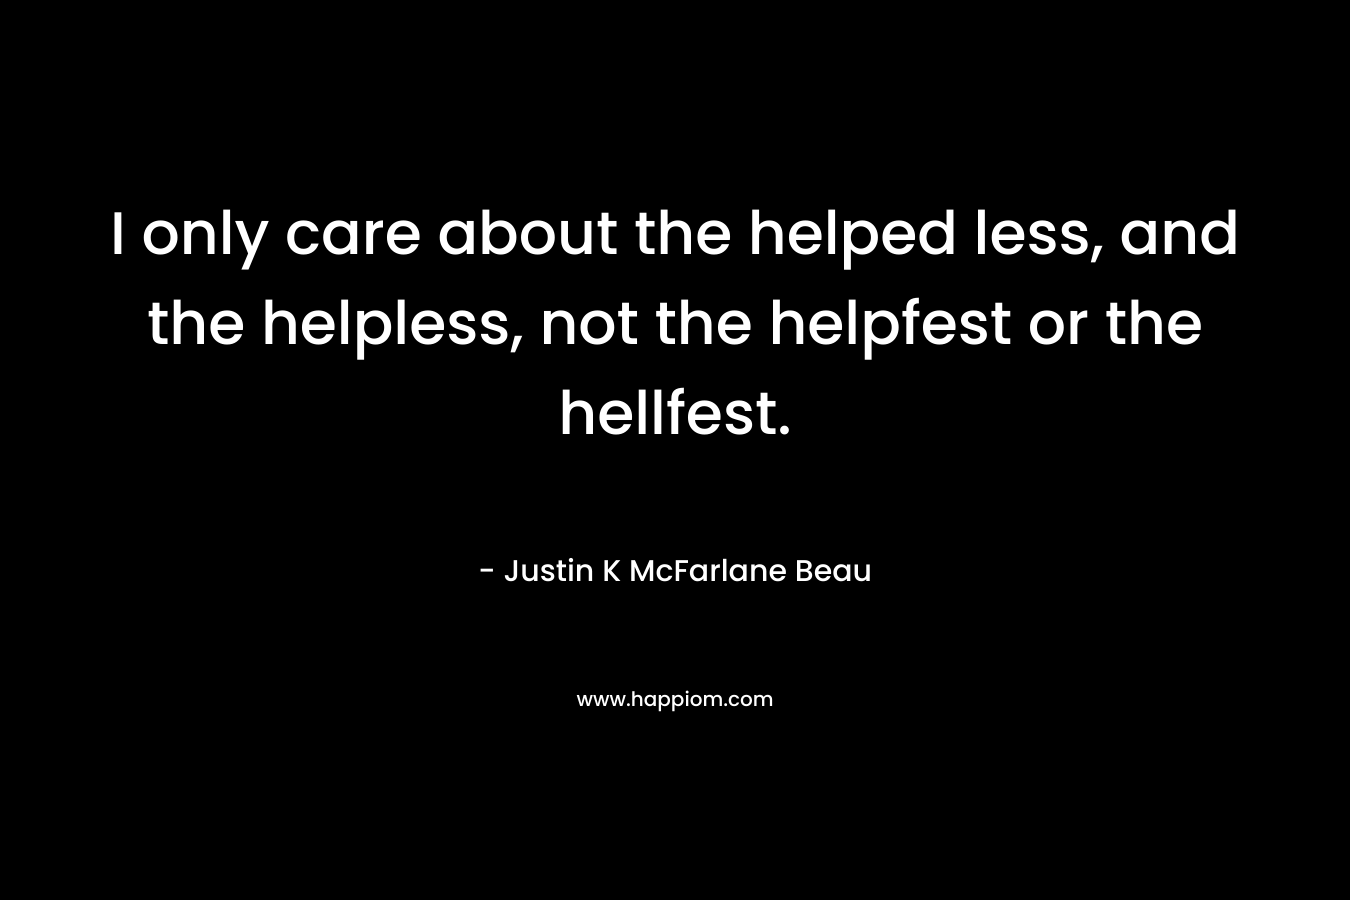 I only care about the helped less, and the helpless, not the helpfest or the hellfest. – Justin K McFarlane Beau